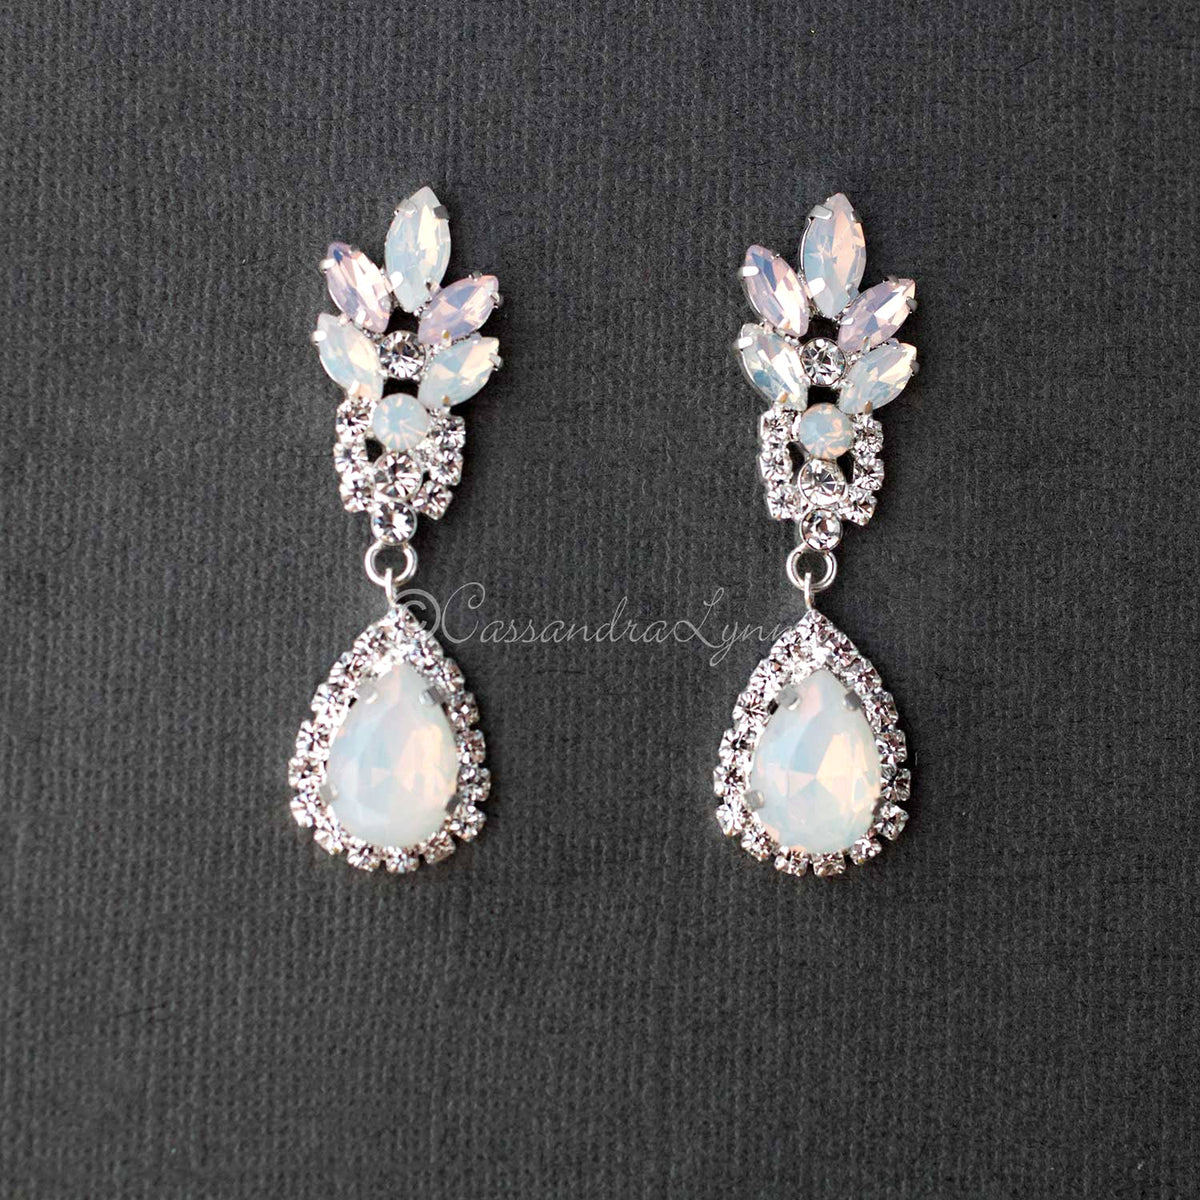 White and Pink Opal Crystal Earrings - Cassandra Lynne